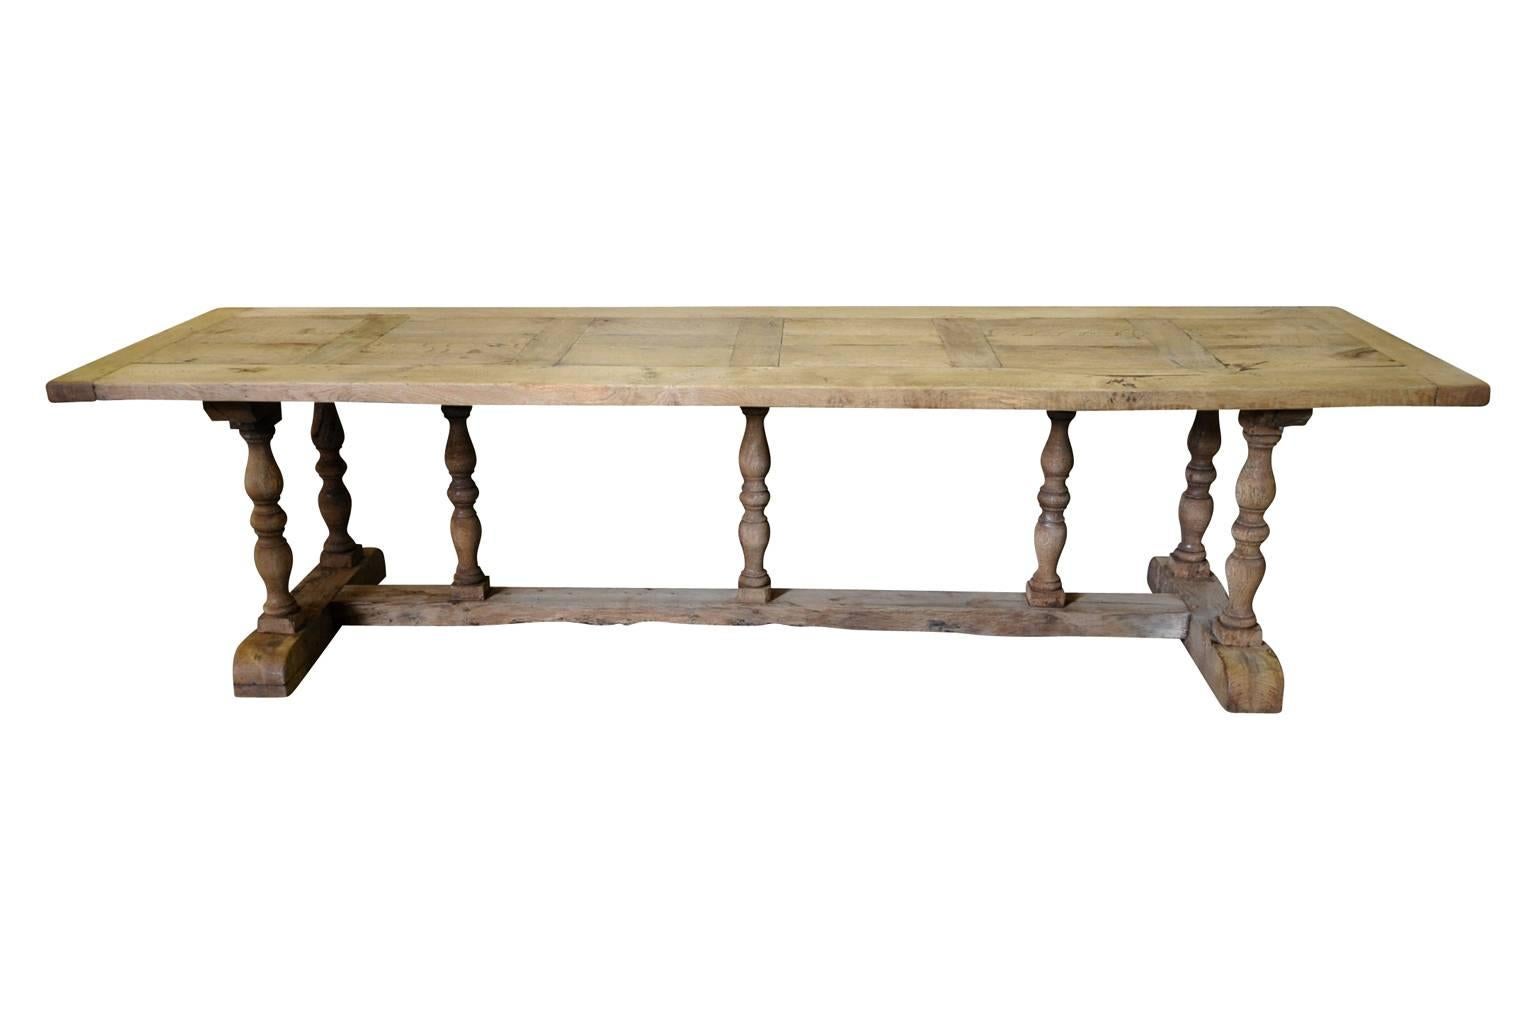 A very handsome later 19th century Baluster leg farm table, trestle table from the South of France. Soundly constructed from washed oak.